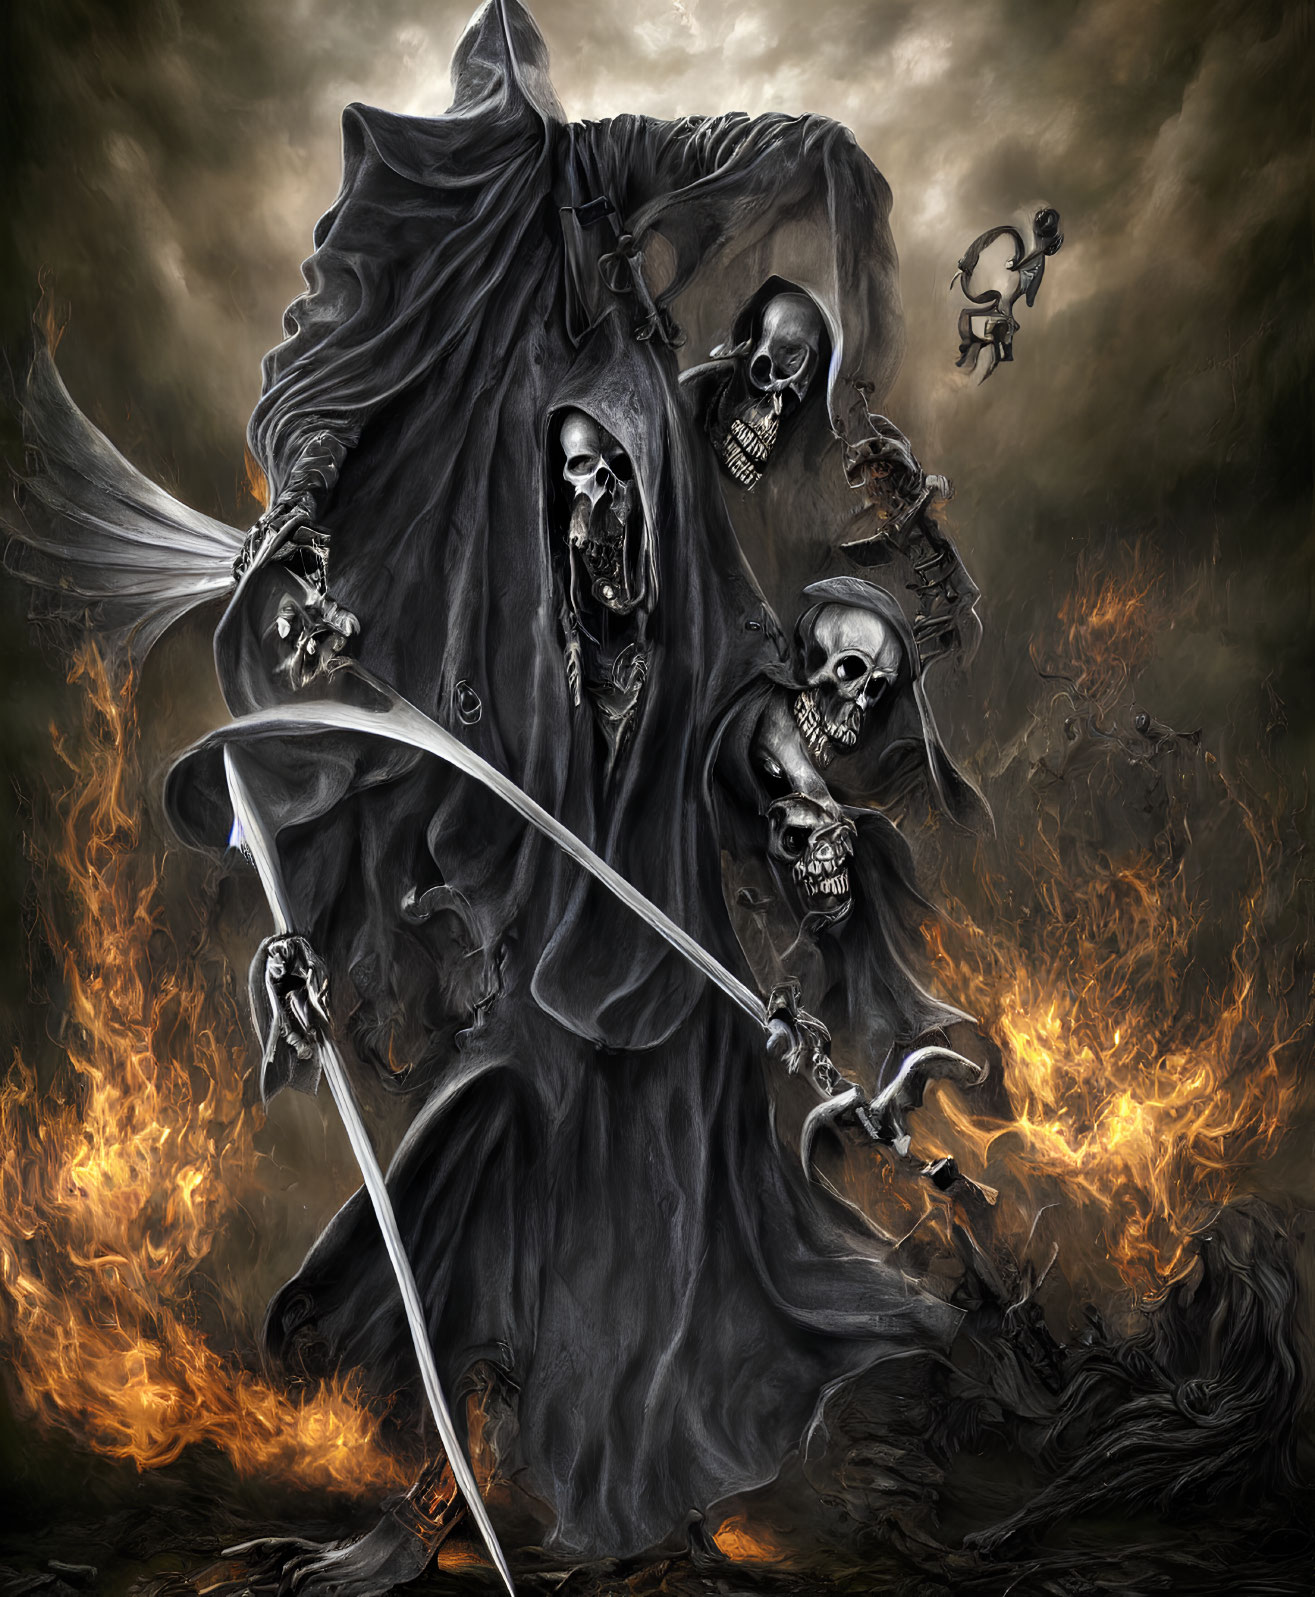 Dark Reaper with Scythe and Skulls in Flames